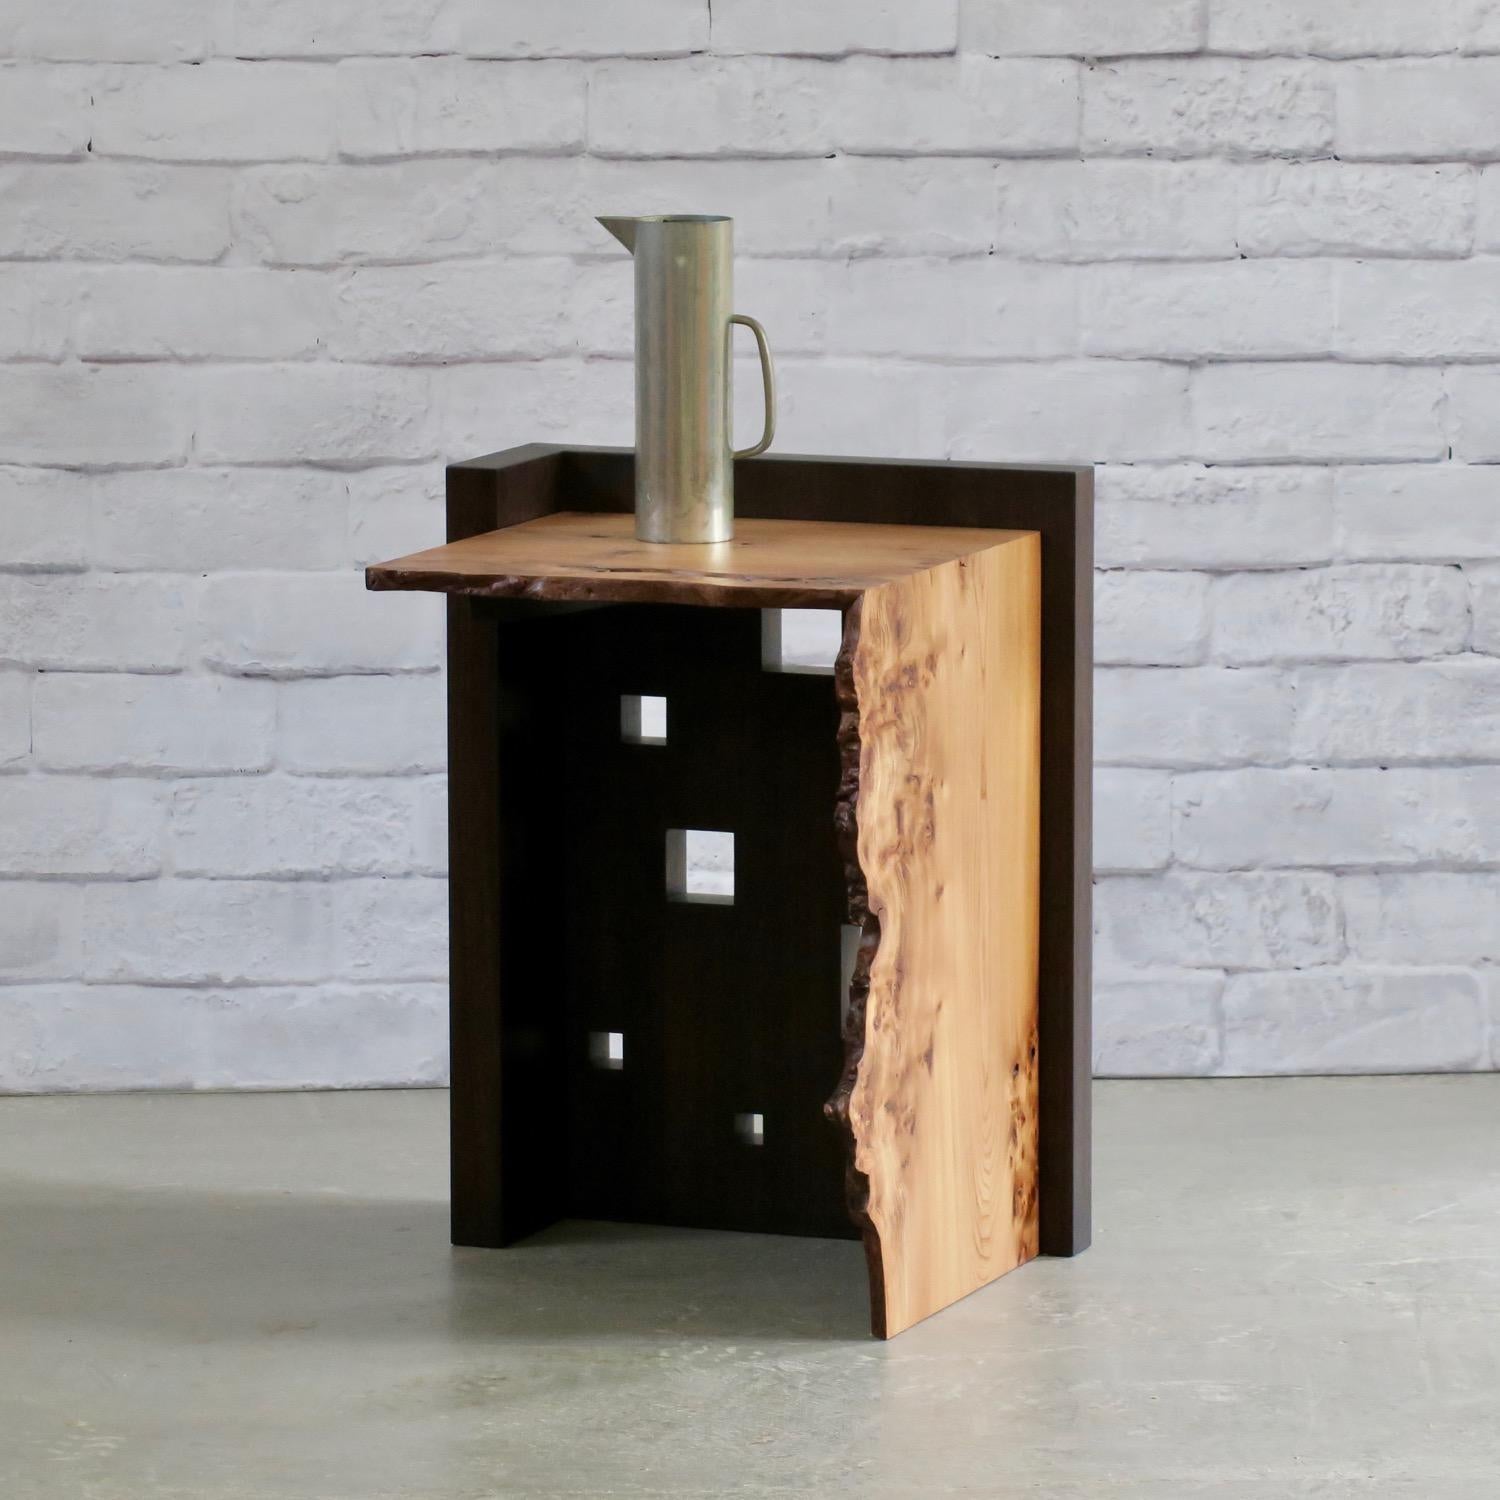 The Oriel V side table features a blackened solid walnut base which has been perforated with square 